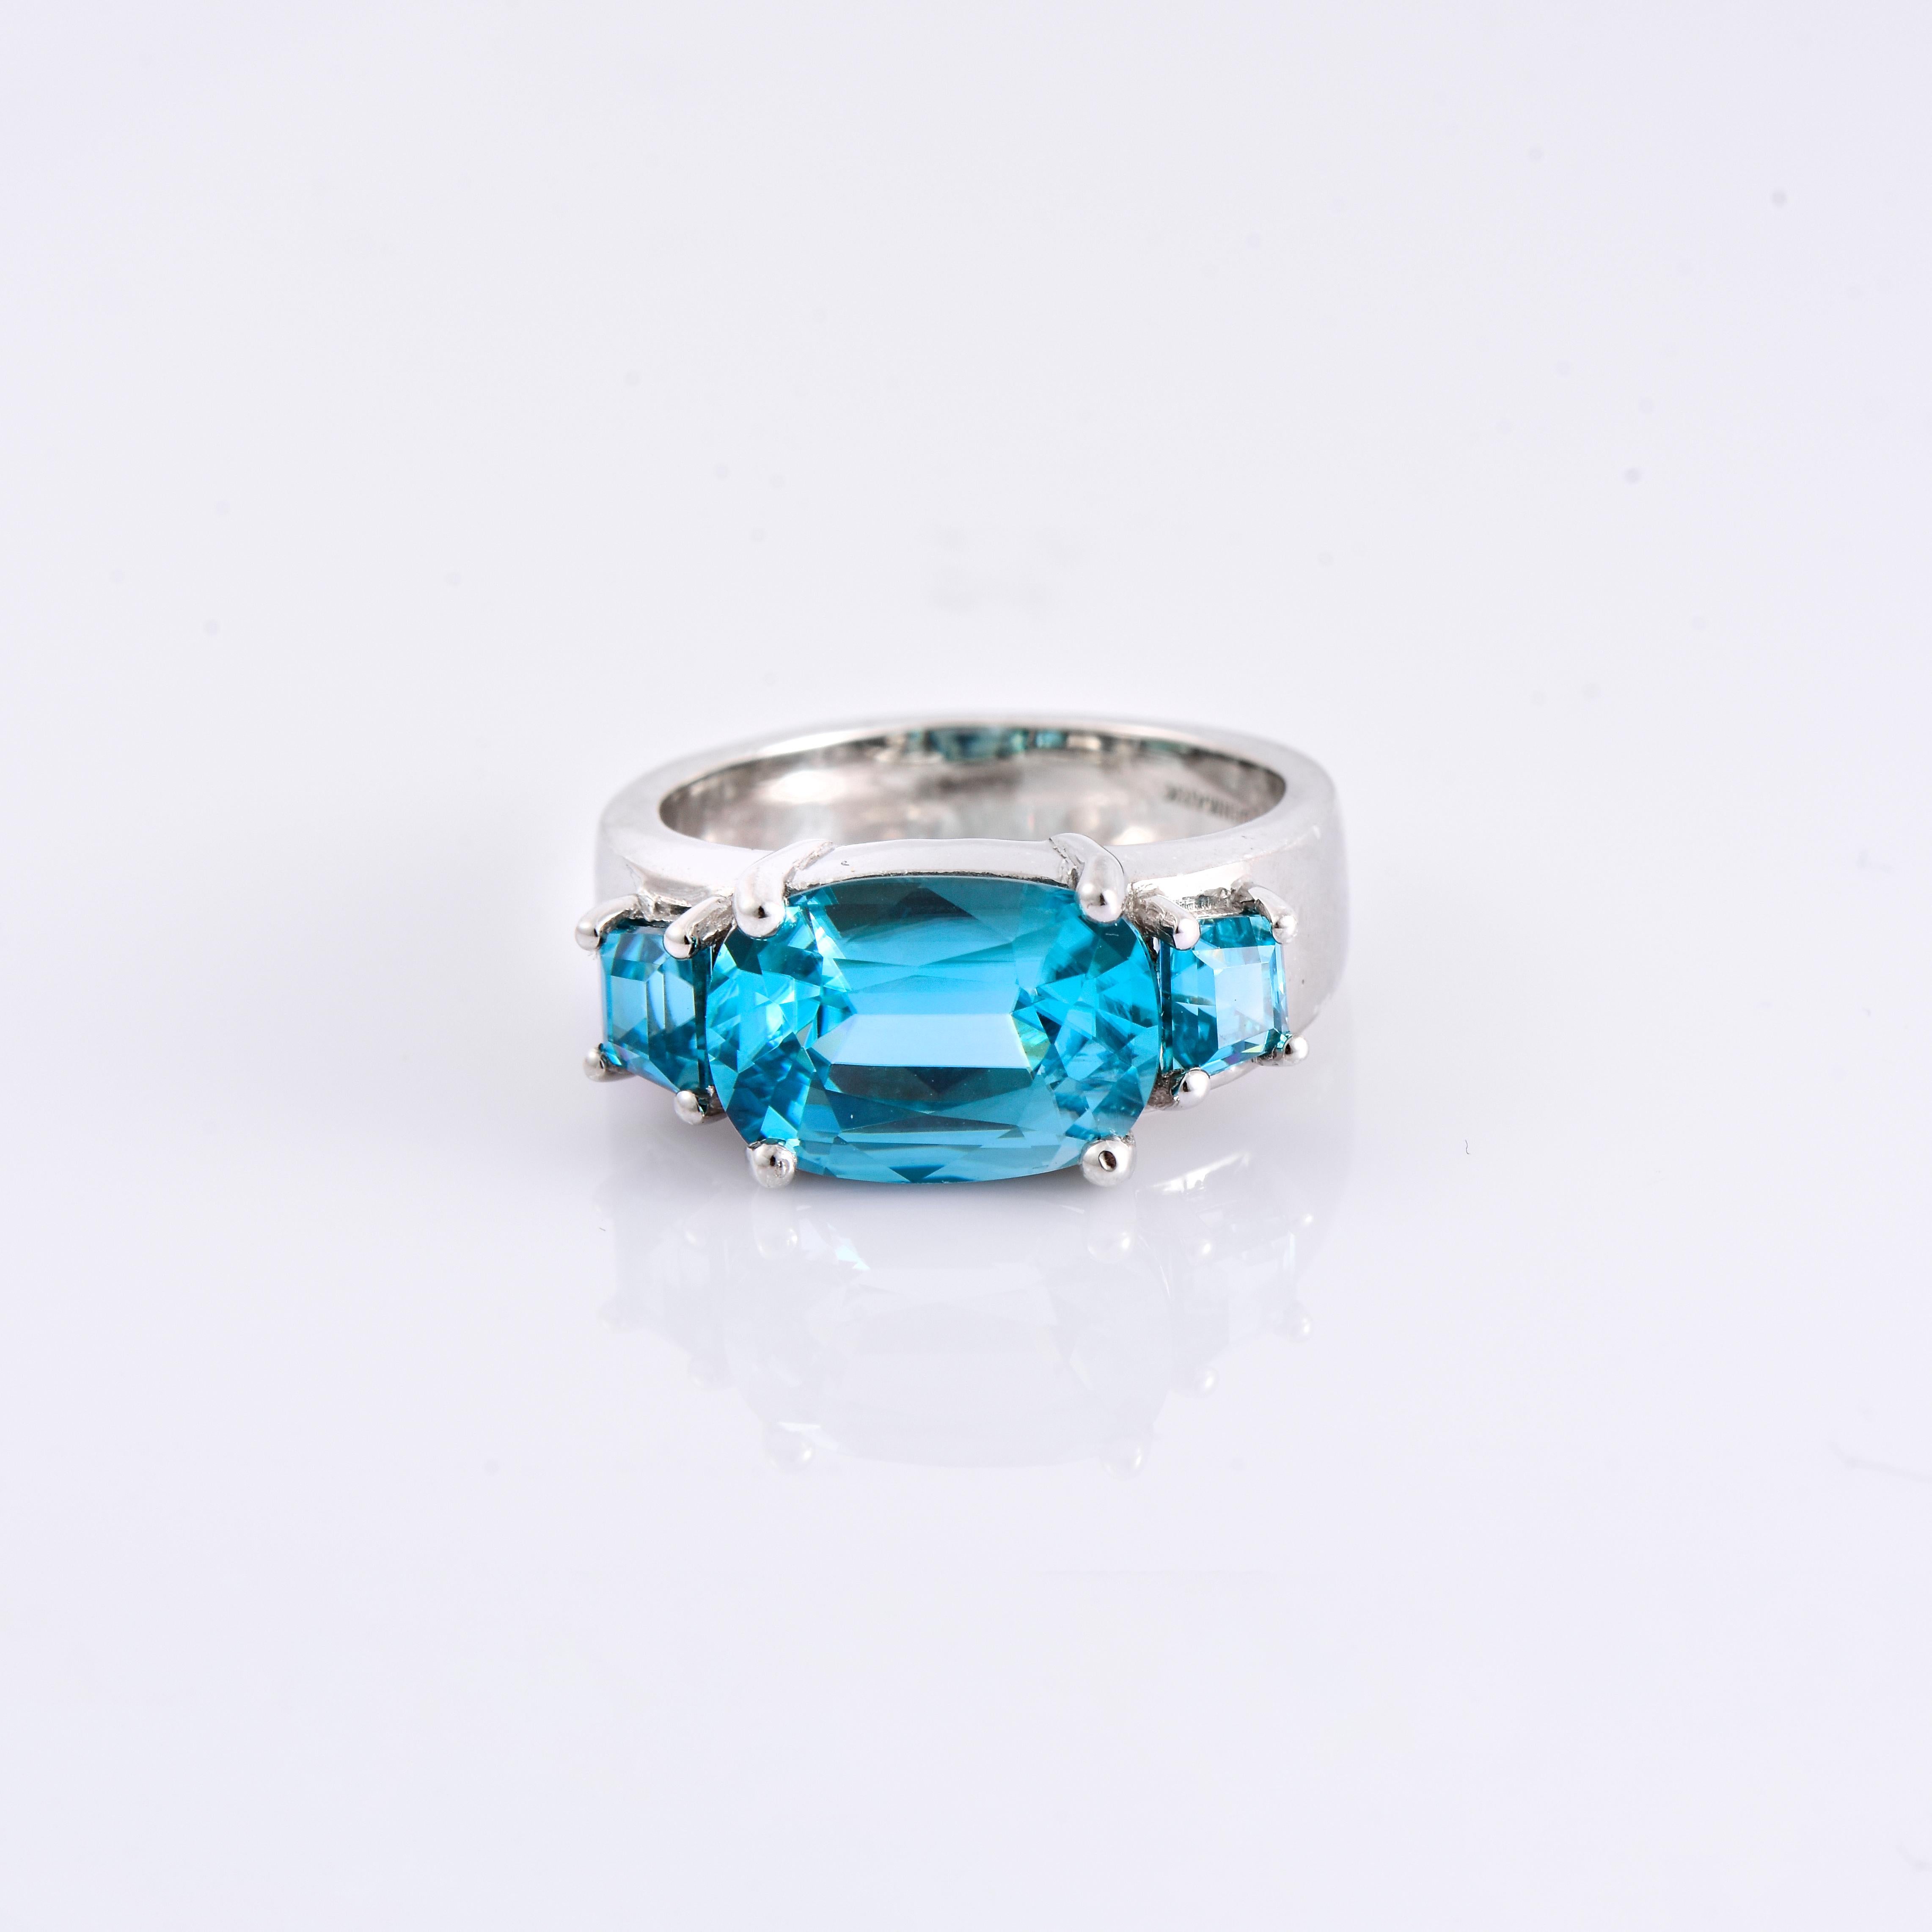 Orloff of Denmark; 925 Sterling Silver Ring set with three Natural Cambodian Blue Zircons totaling to 8.27 carats.

This piece has been meticulously hand-crafted out of 925 sterling silver.
In the center sits a fantastic 6.68 carat blue zircon